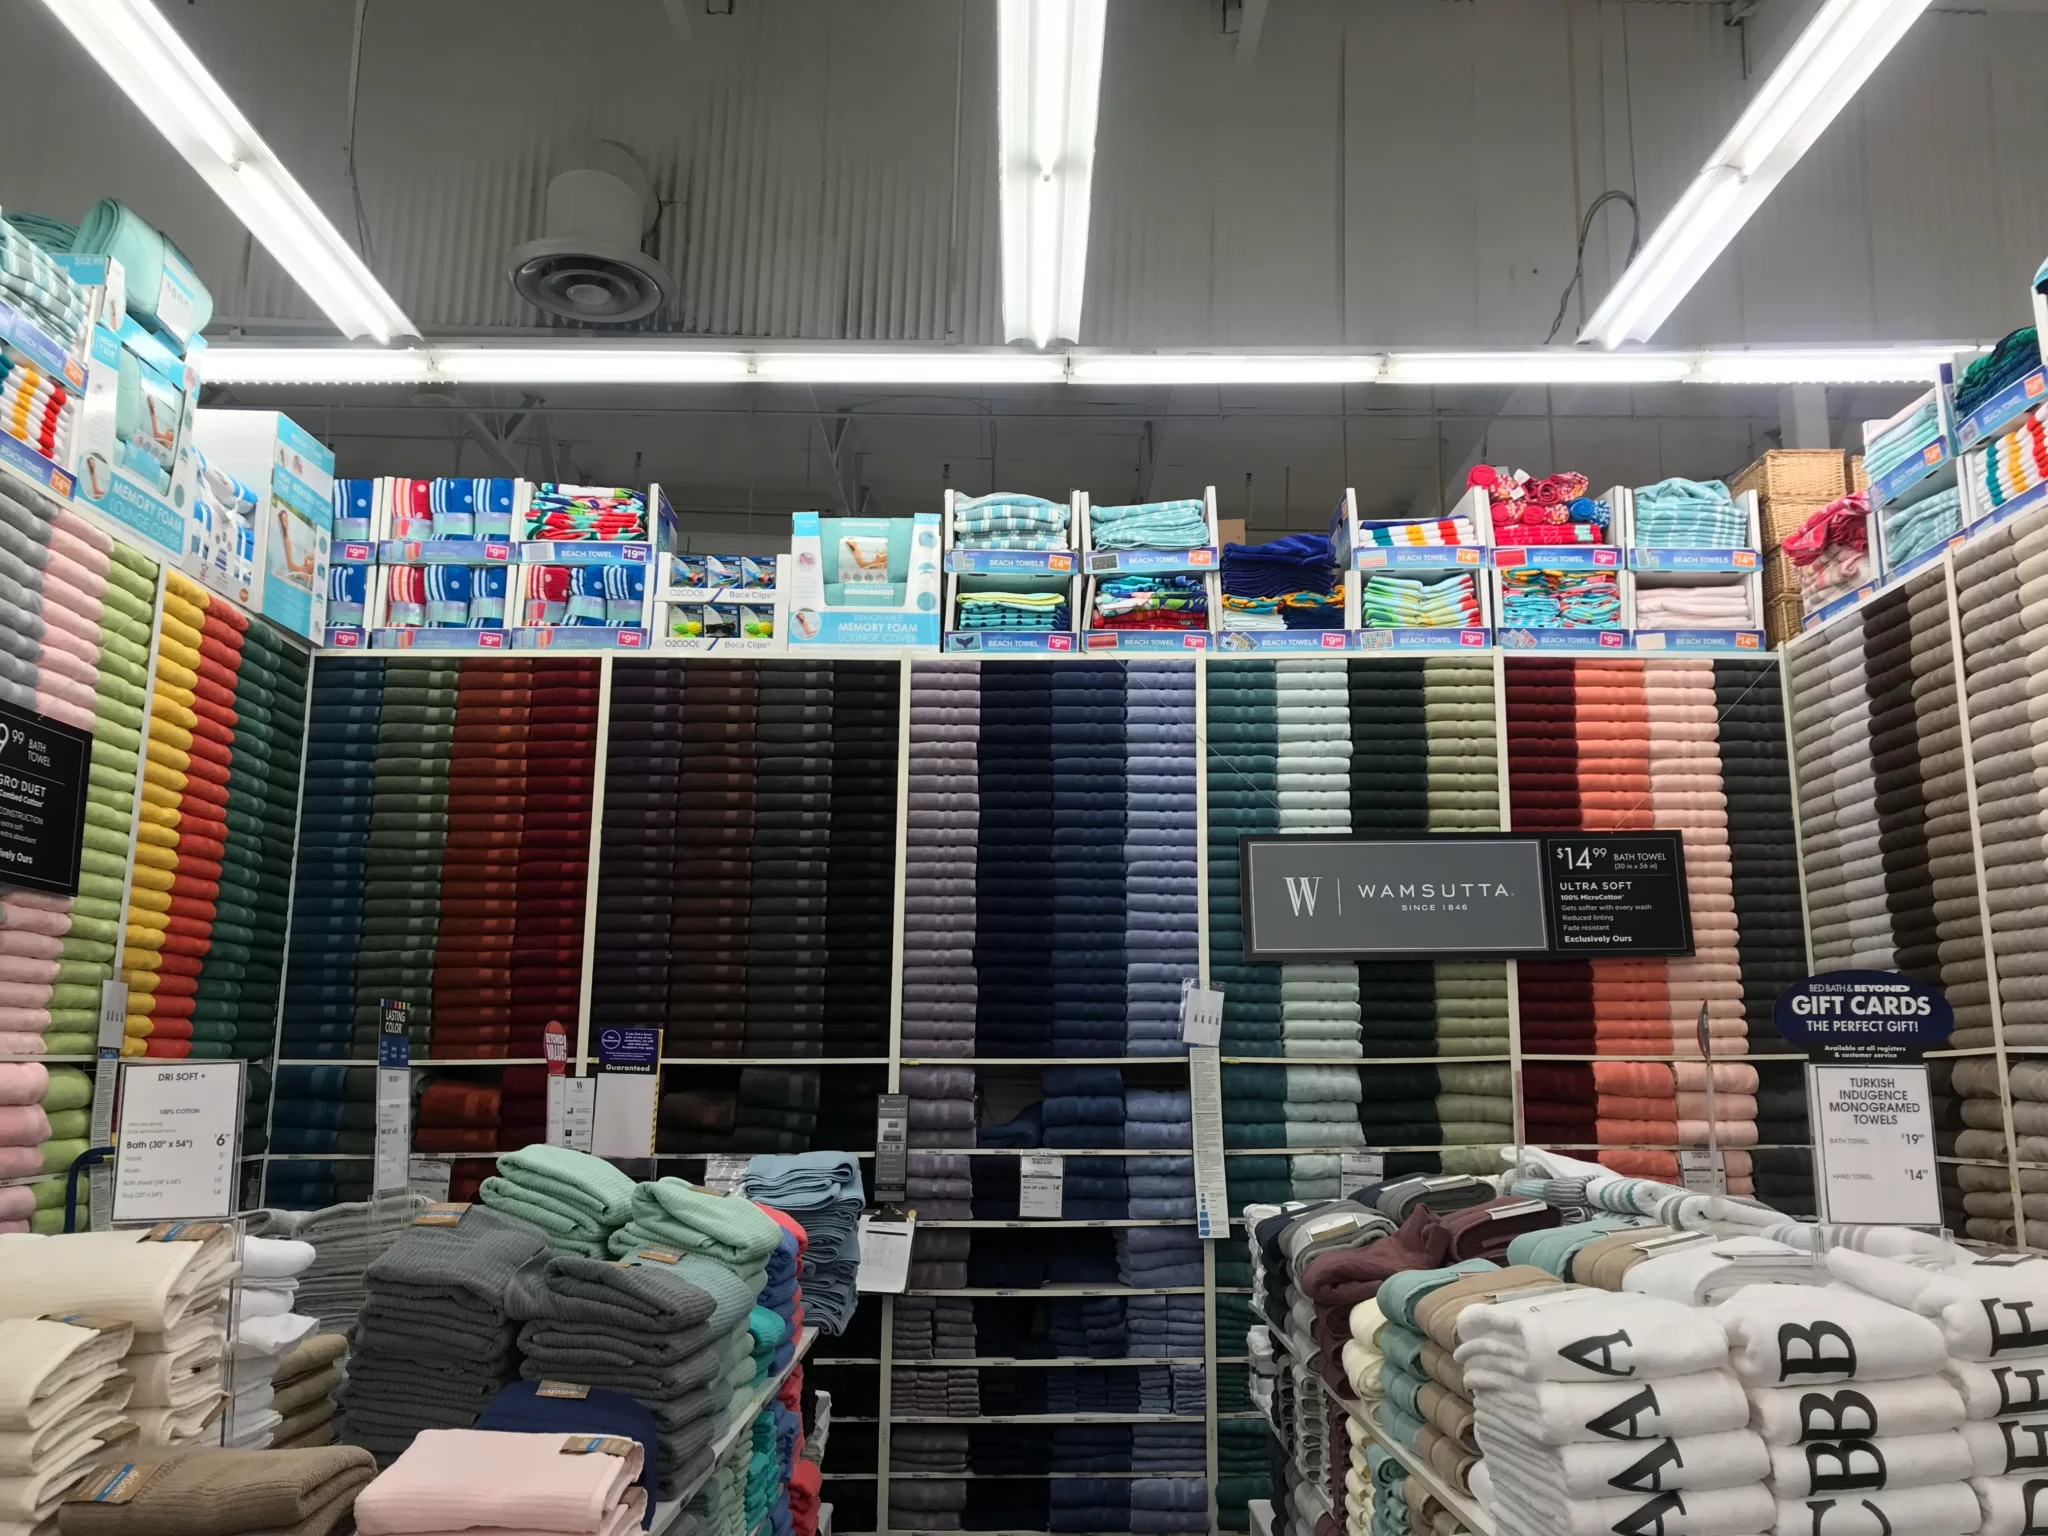 Loja Bed, Bath and Beyond - Toalhas